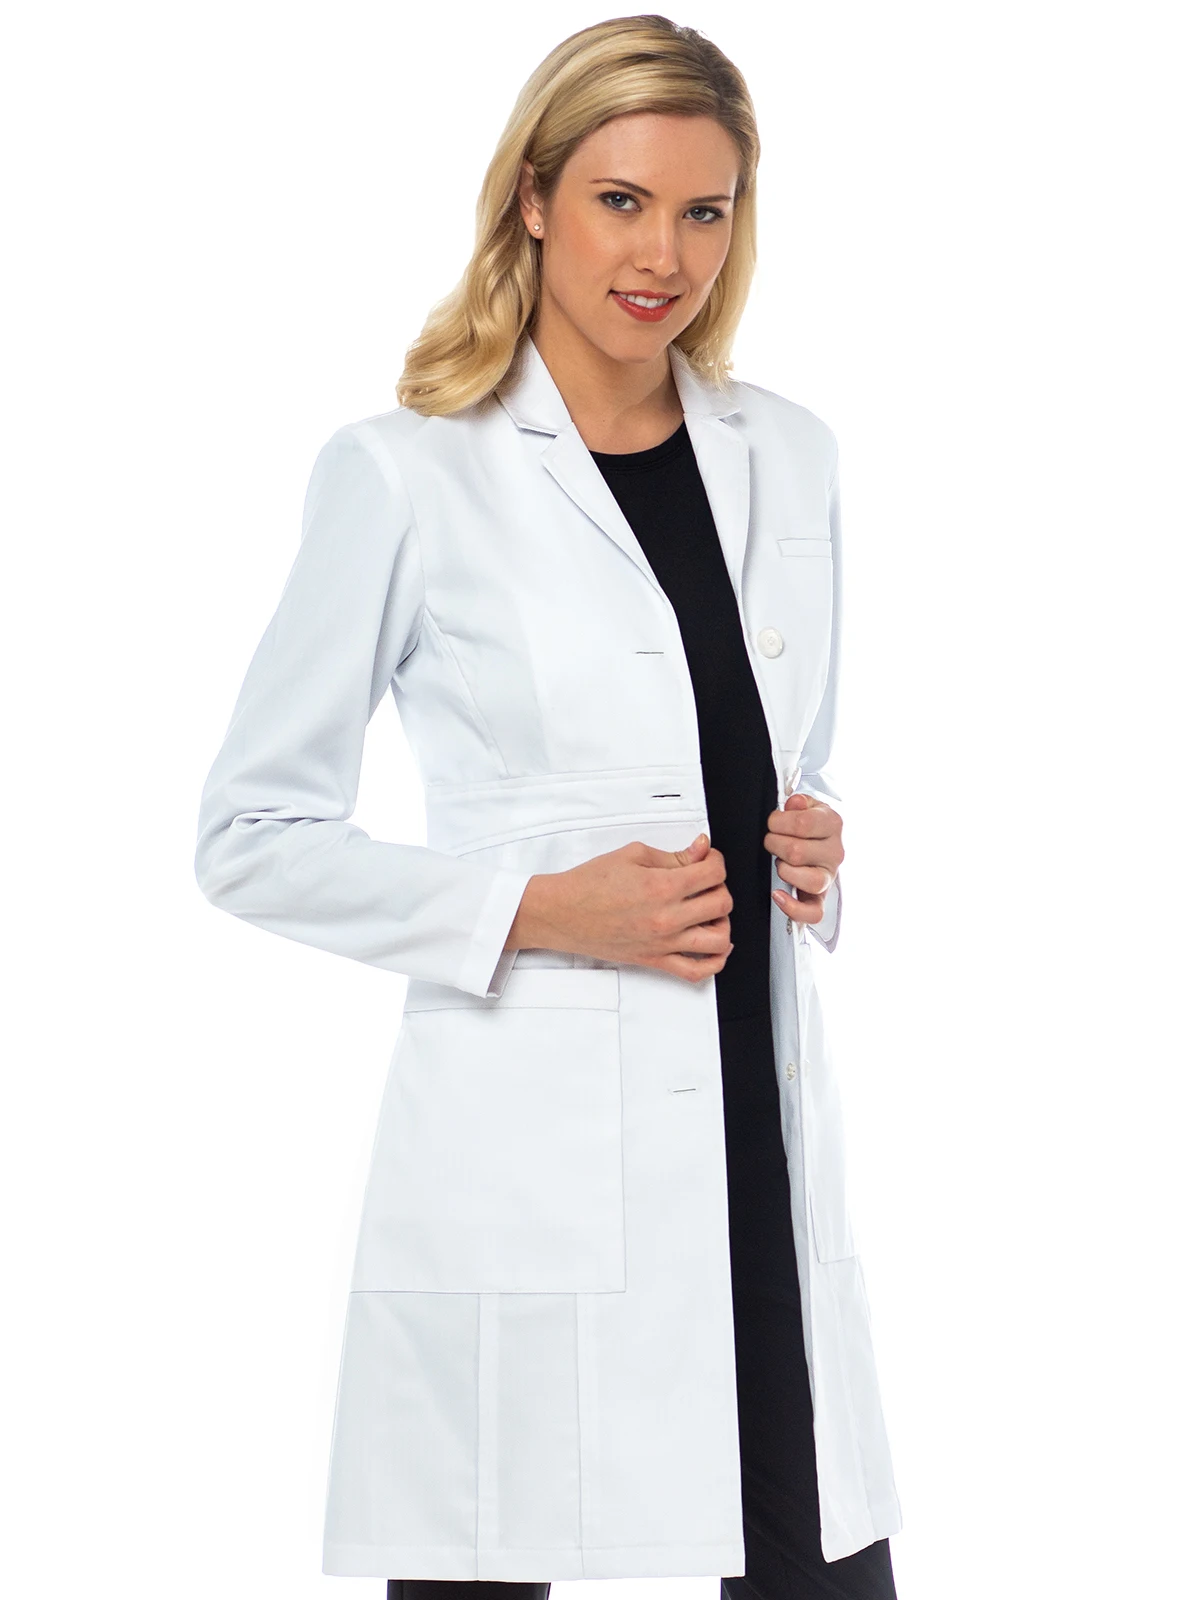 
Good Quality Low Price White Medical Doctor Uniform For Female 